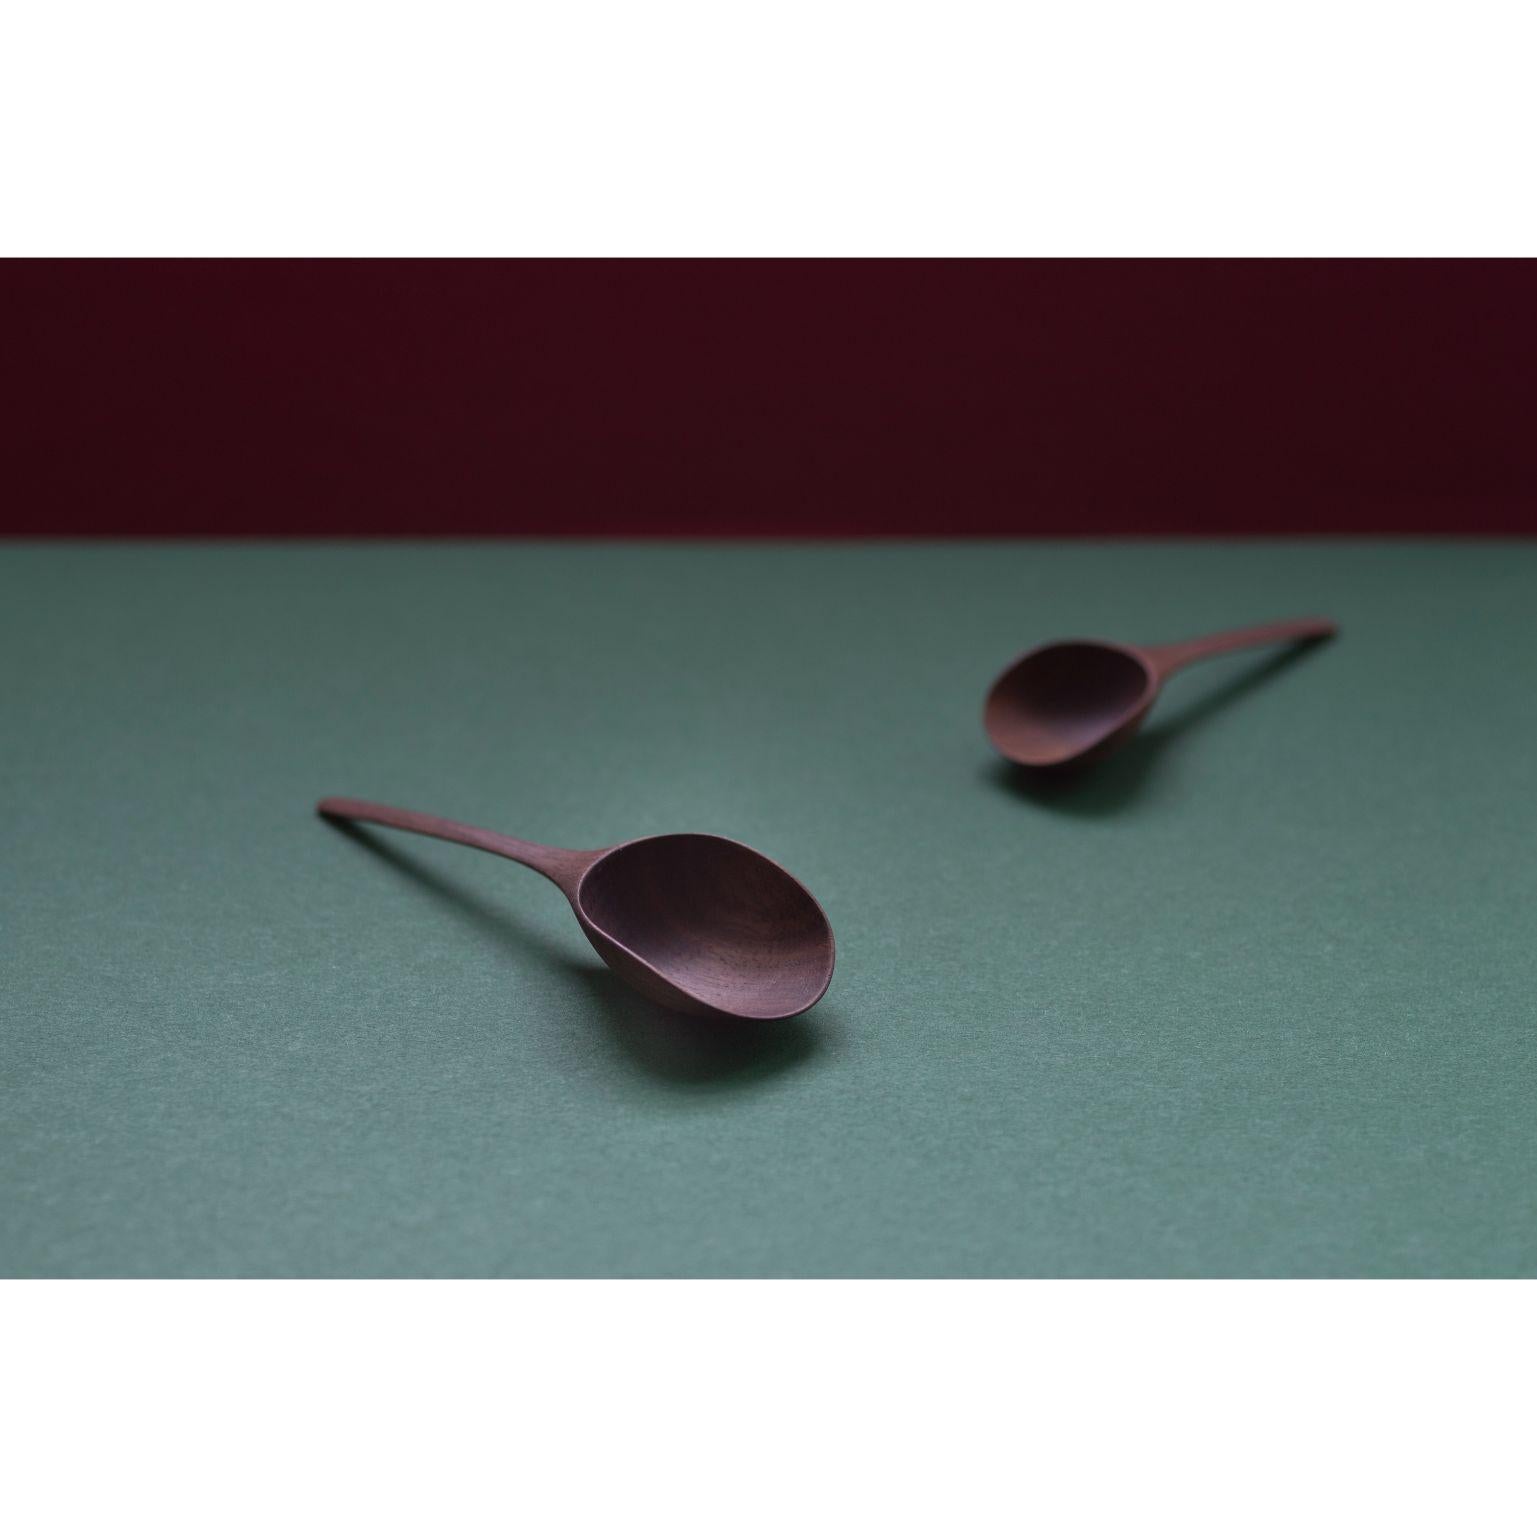 Set of 2 Kupu Spoons by Antrei Hartikainen
Materials: Walnut, Maple, Natural Oil Wax
Dimensions: W 10 cm

Also Available in a variety of woods, please contact us 

The unusual proportions of the kupu spoons give them an unexpected, delicate